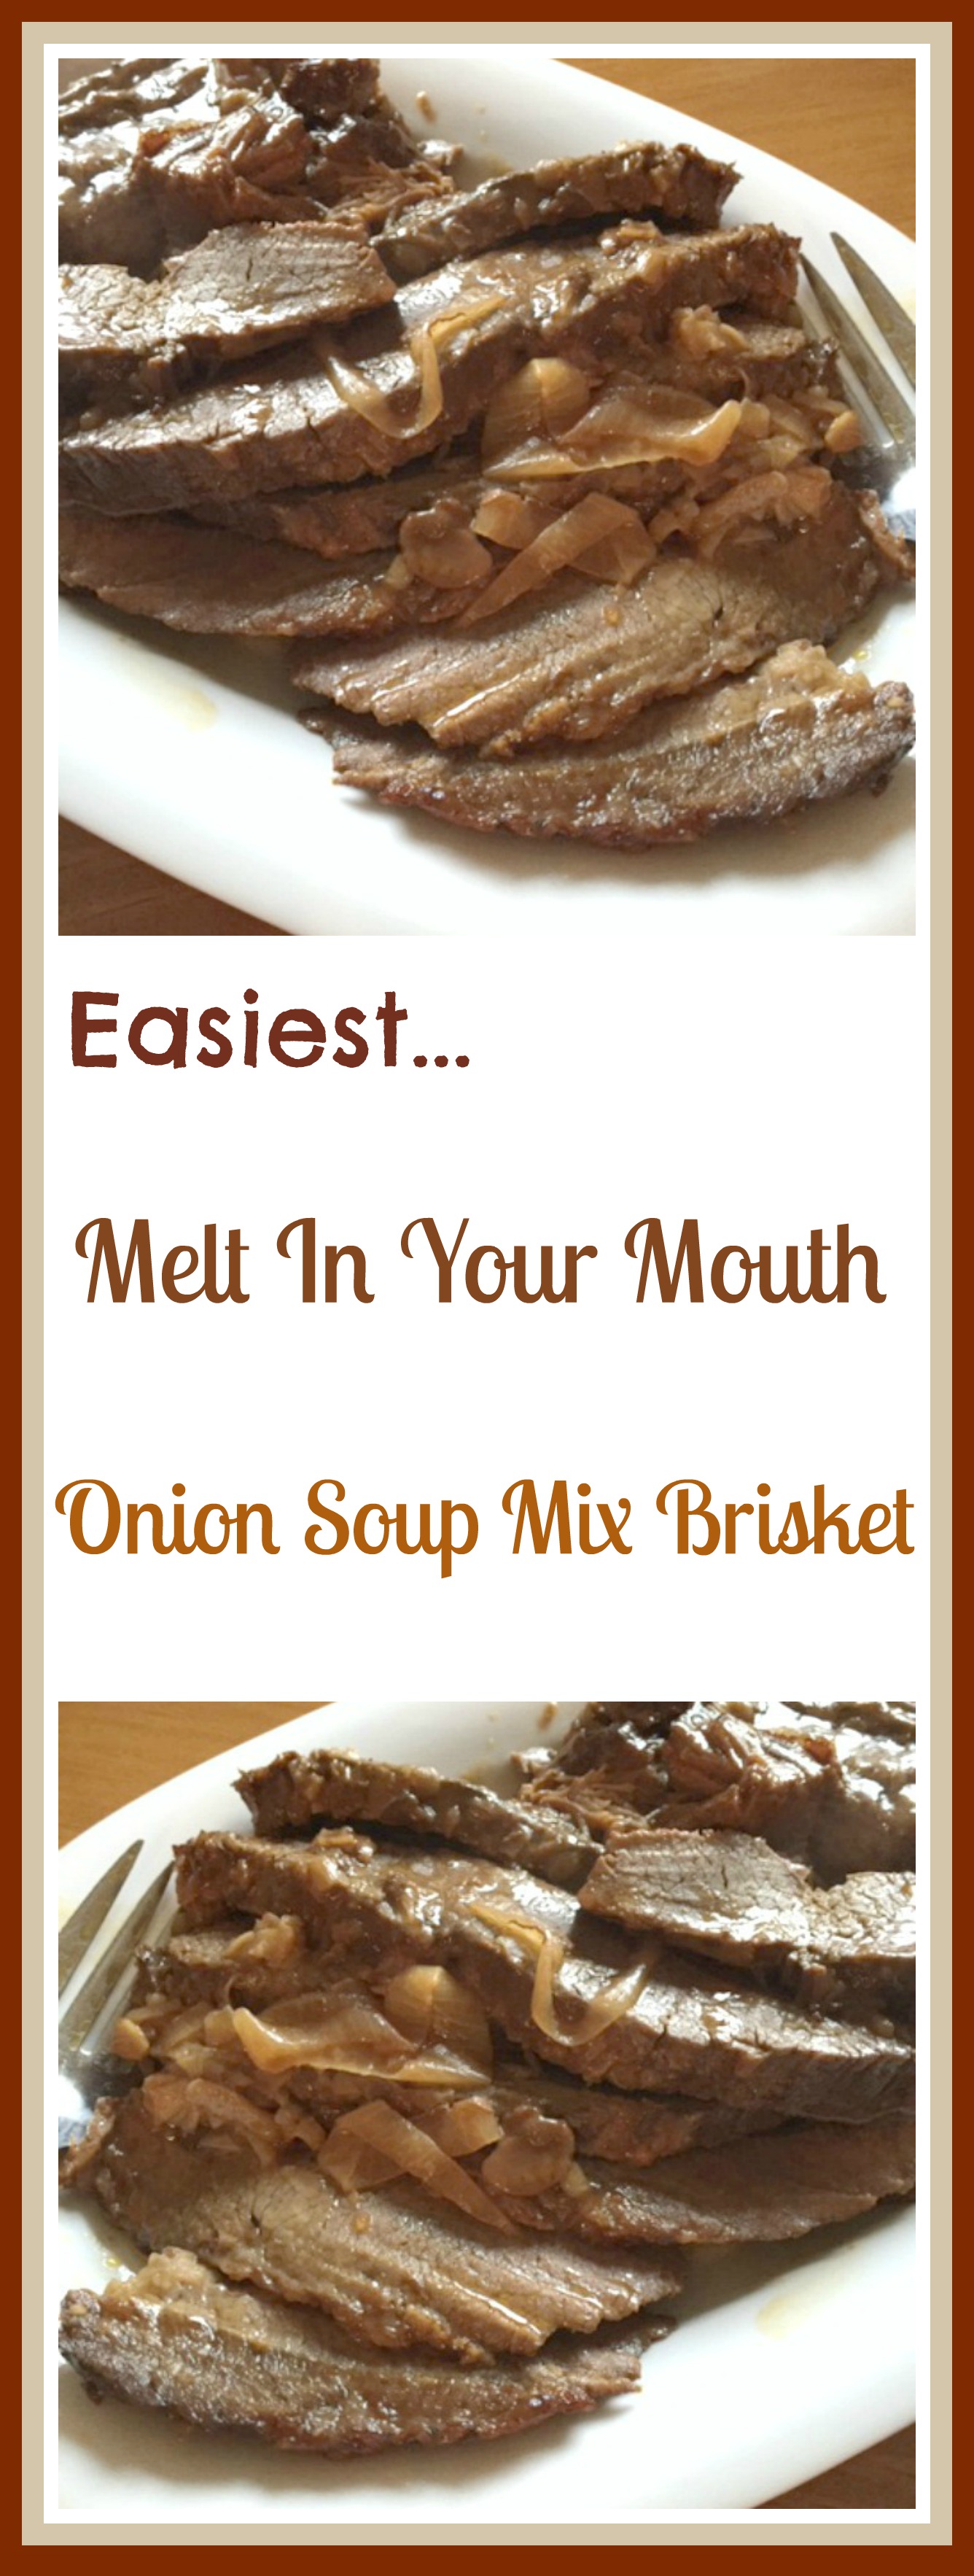 Easiest Melt In Your Mouth Onion Soup Mix Brisket Pams Daily Dish